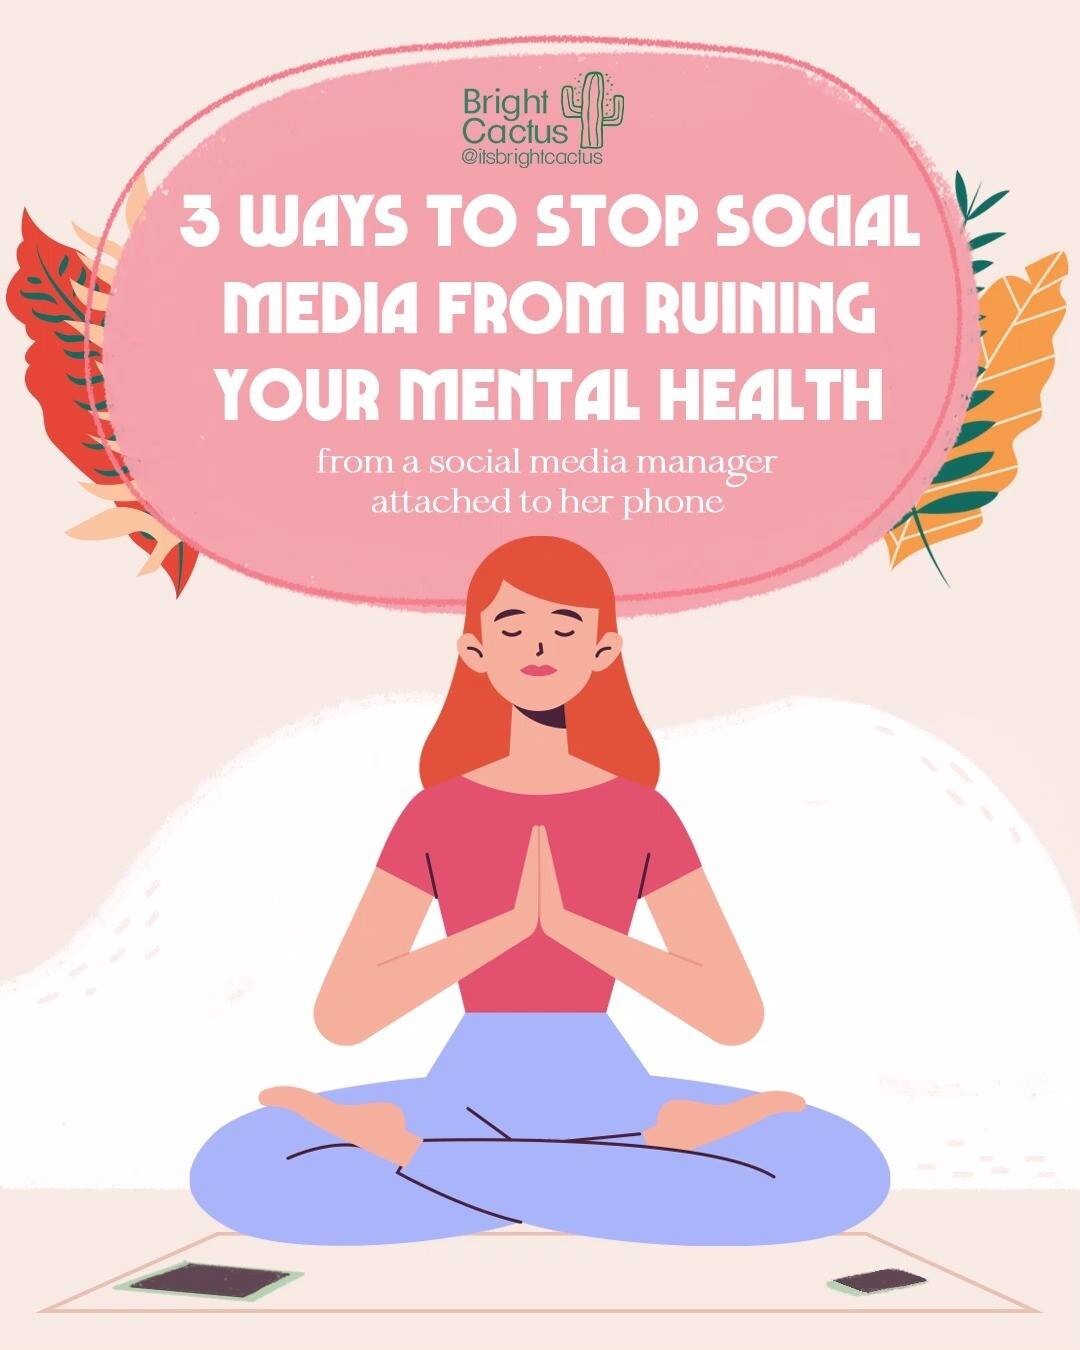 Three small ways to make sure social media doesn&rsquo;t negatively affect your mental health:⠀
⠀
🙊 Mute often. Mute words or phrases that you don&rsquo;t want to see, mute people you can&rsquo;t unfollow for whatever reason, and mute Stories that d